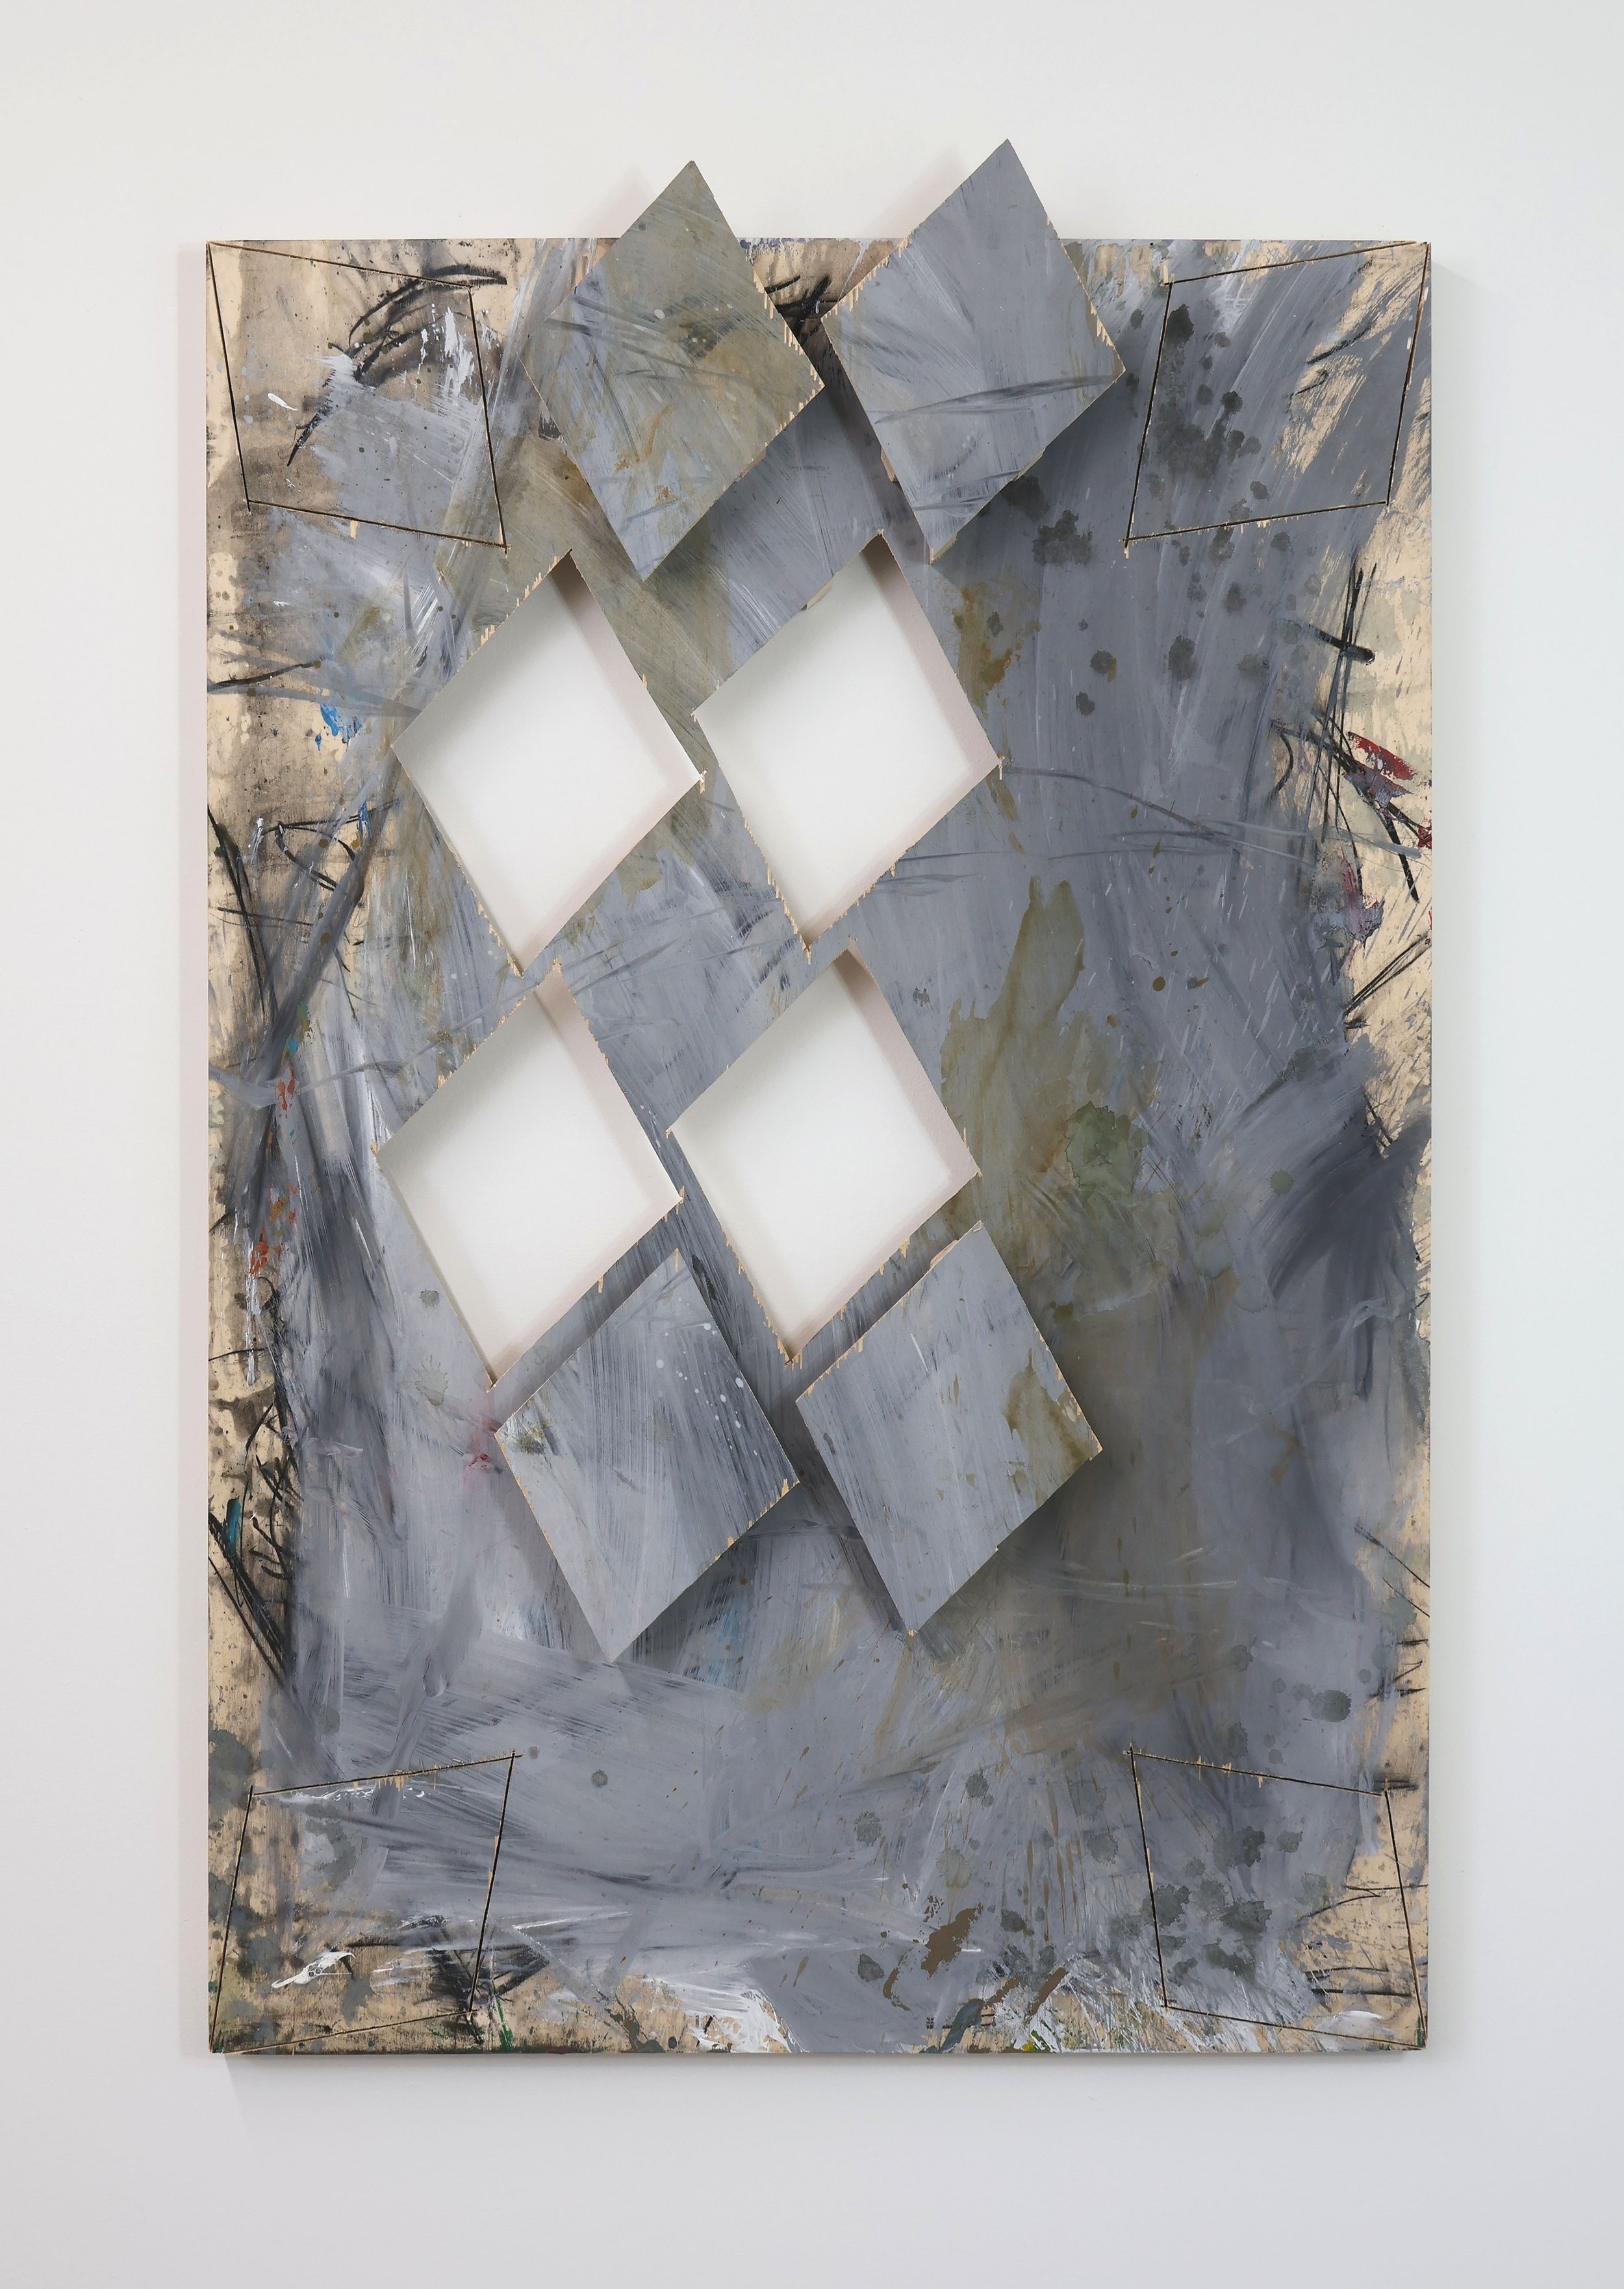  Untitled  Acrylic, charcoal, graphite pencil on wood panel.   65 x 40 x 2 in  2023 